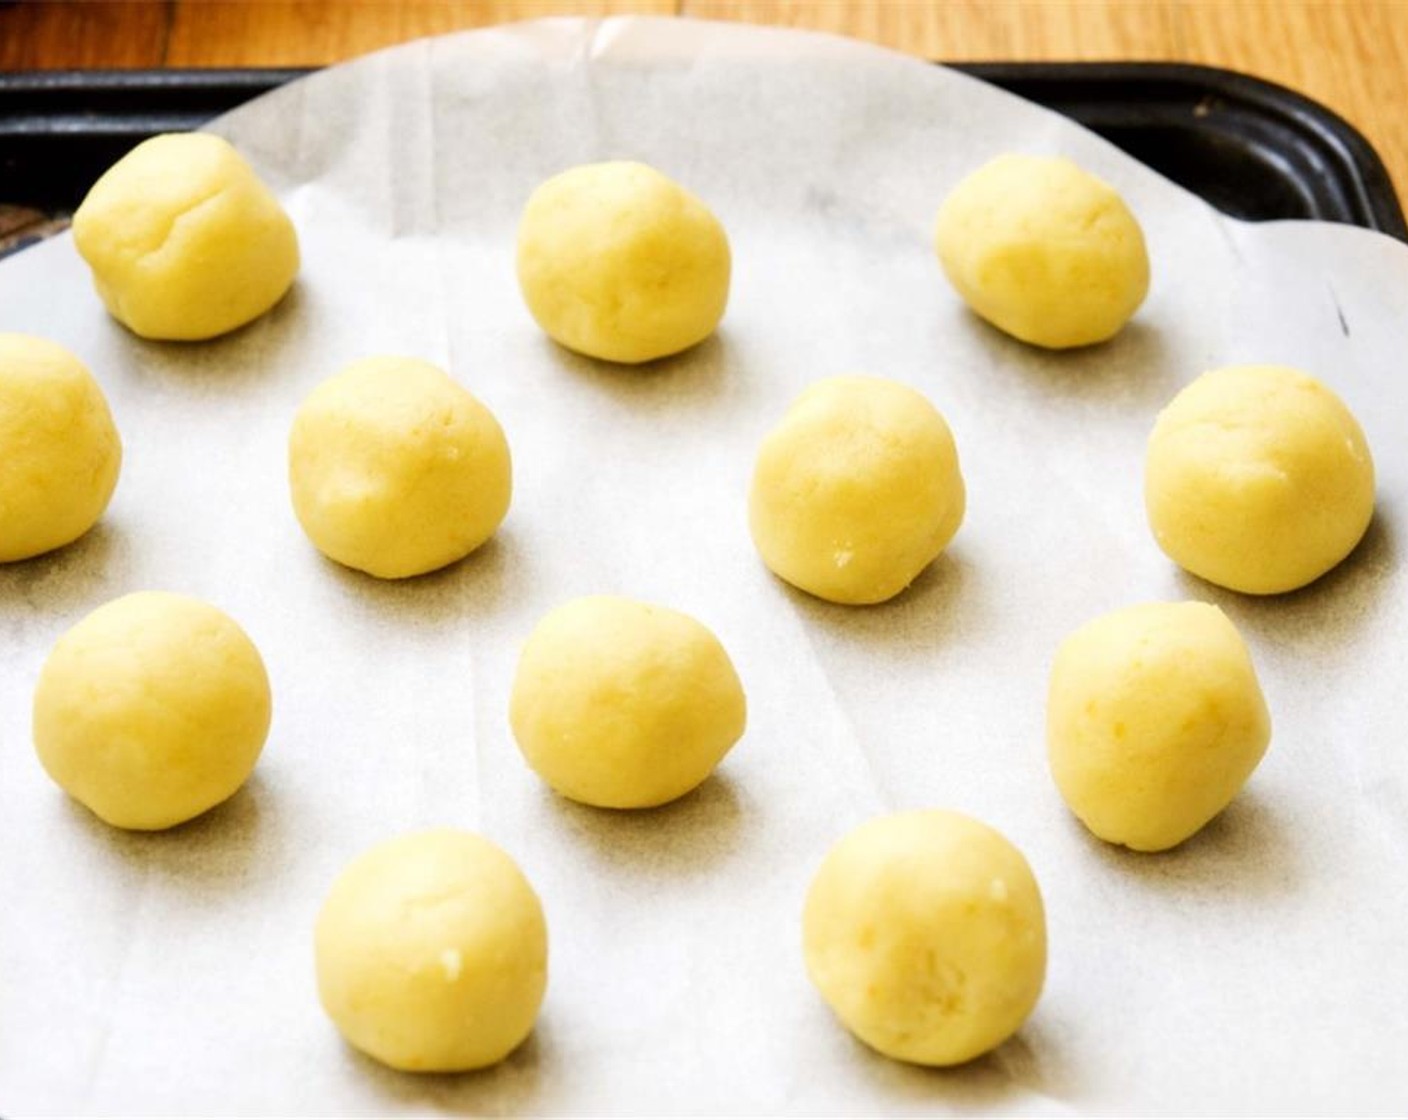 step 6 Scoop out a tablespoon of dough, then roll them into balls between your hands. Place them on parchment paper. Bake for 13 minutes in your preheated oven.